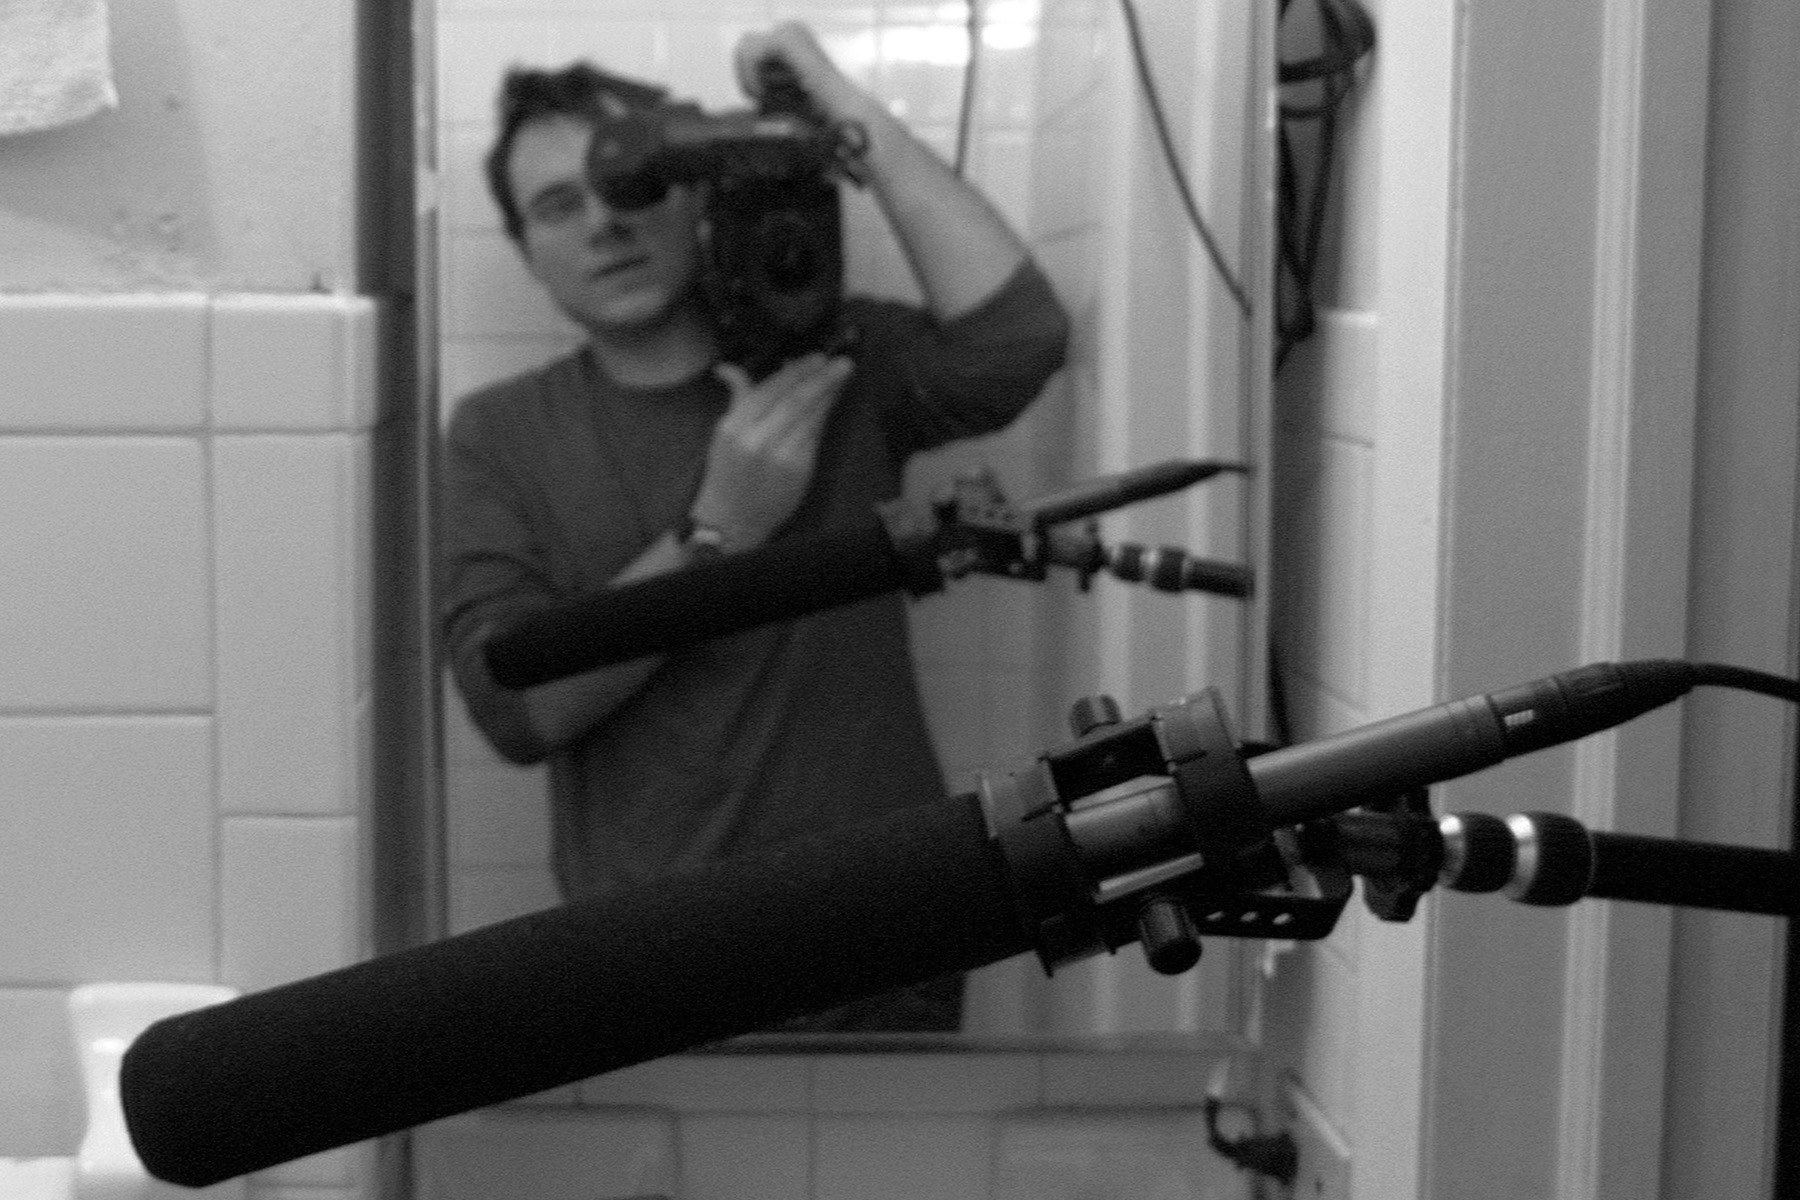 Director Carlos Ferrer captures himself through a mirror while shooting a scene from Retina.